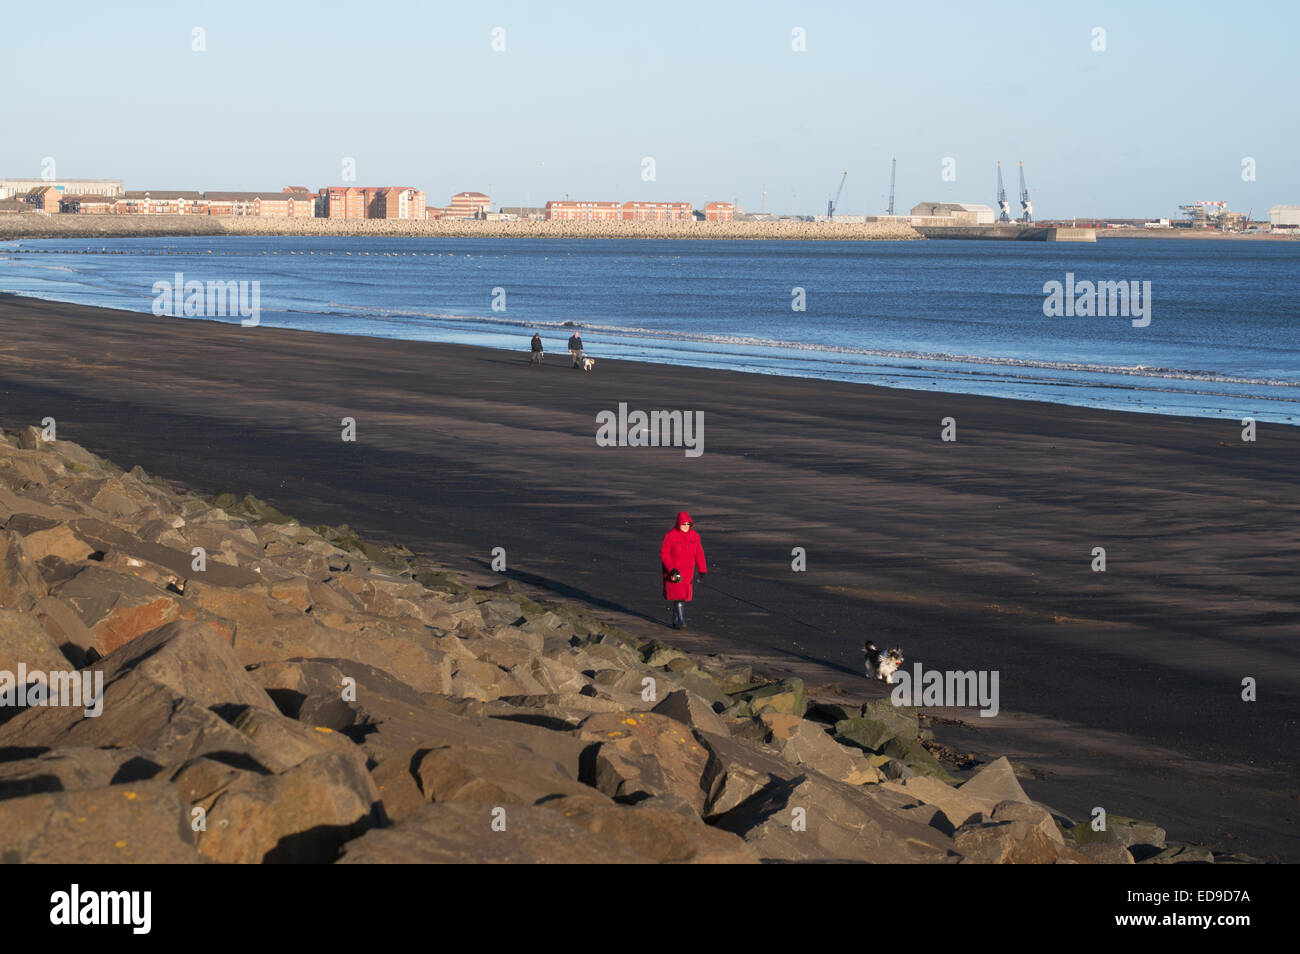 Woman walking dog along beach covered in coal dust, Hartlepool, north east England, UK Stock Photo